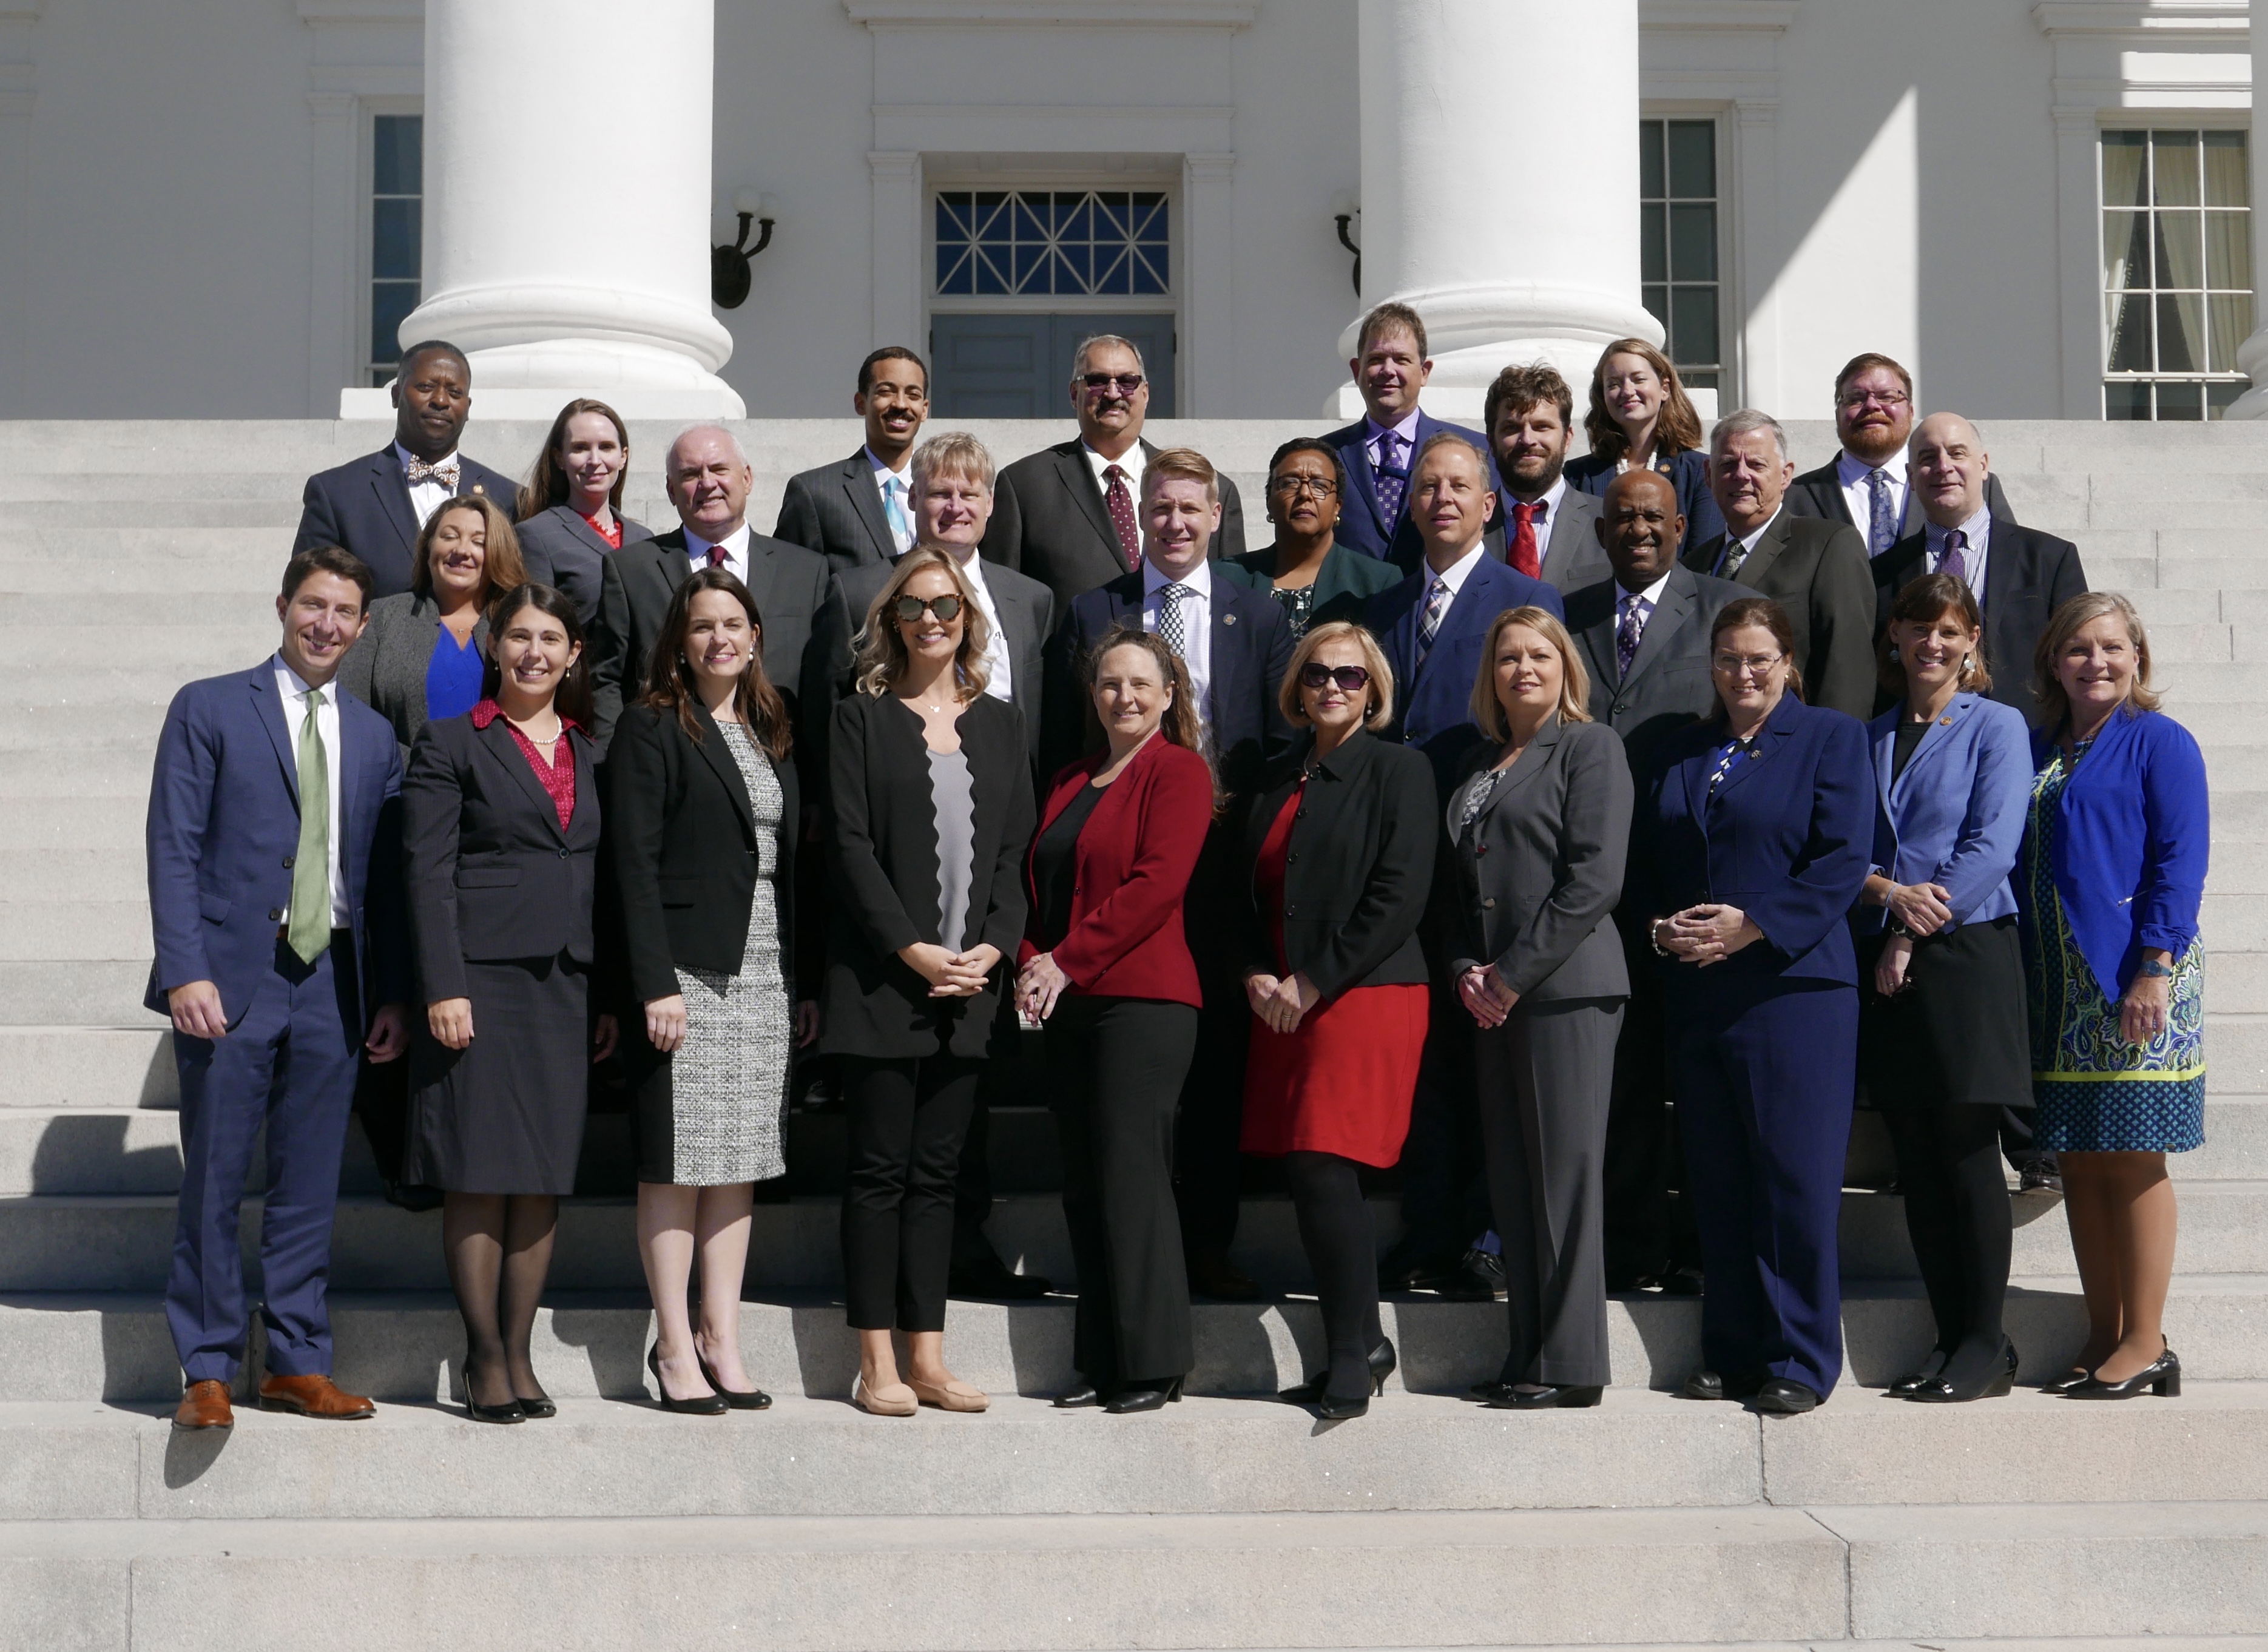 The Fall 2018 Virginia Executive Institute graduates conclude with their class photo at the state Capitol.